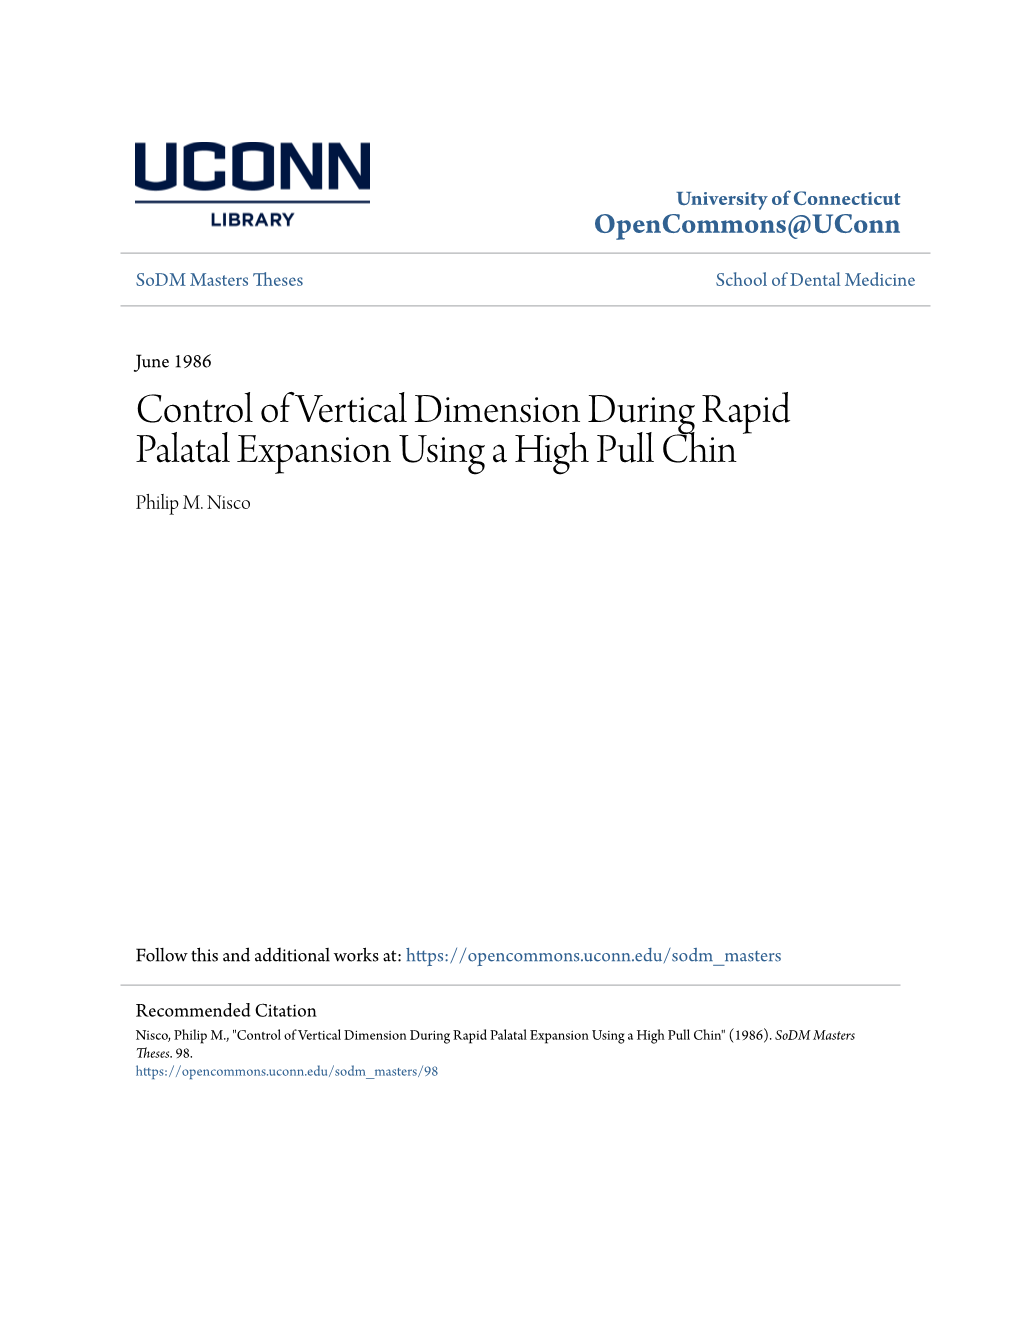 Control of Vertical Dimension During Rapid Palatal Expansion Using a High Pull Chin Philip M